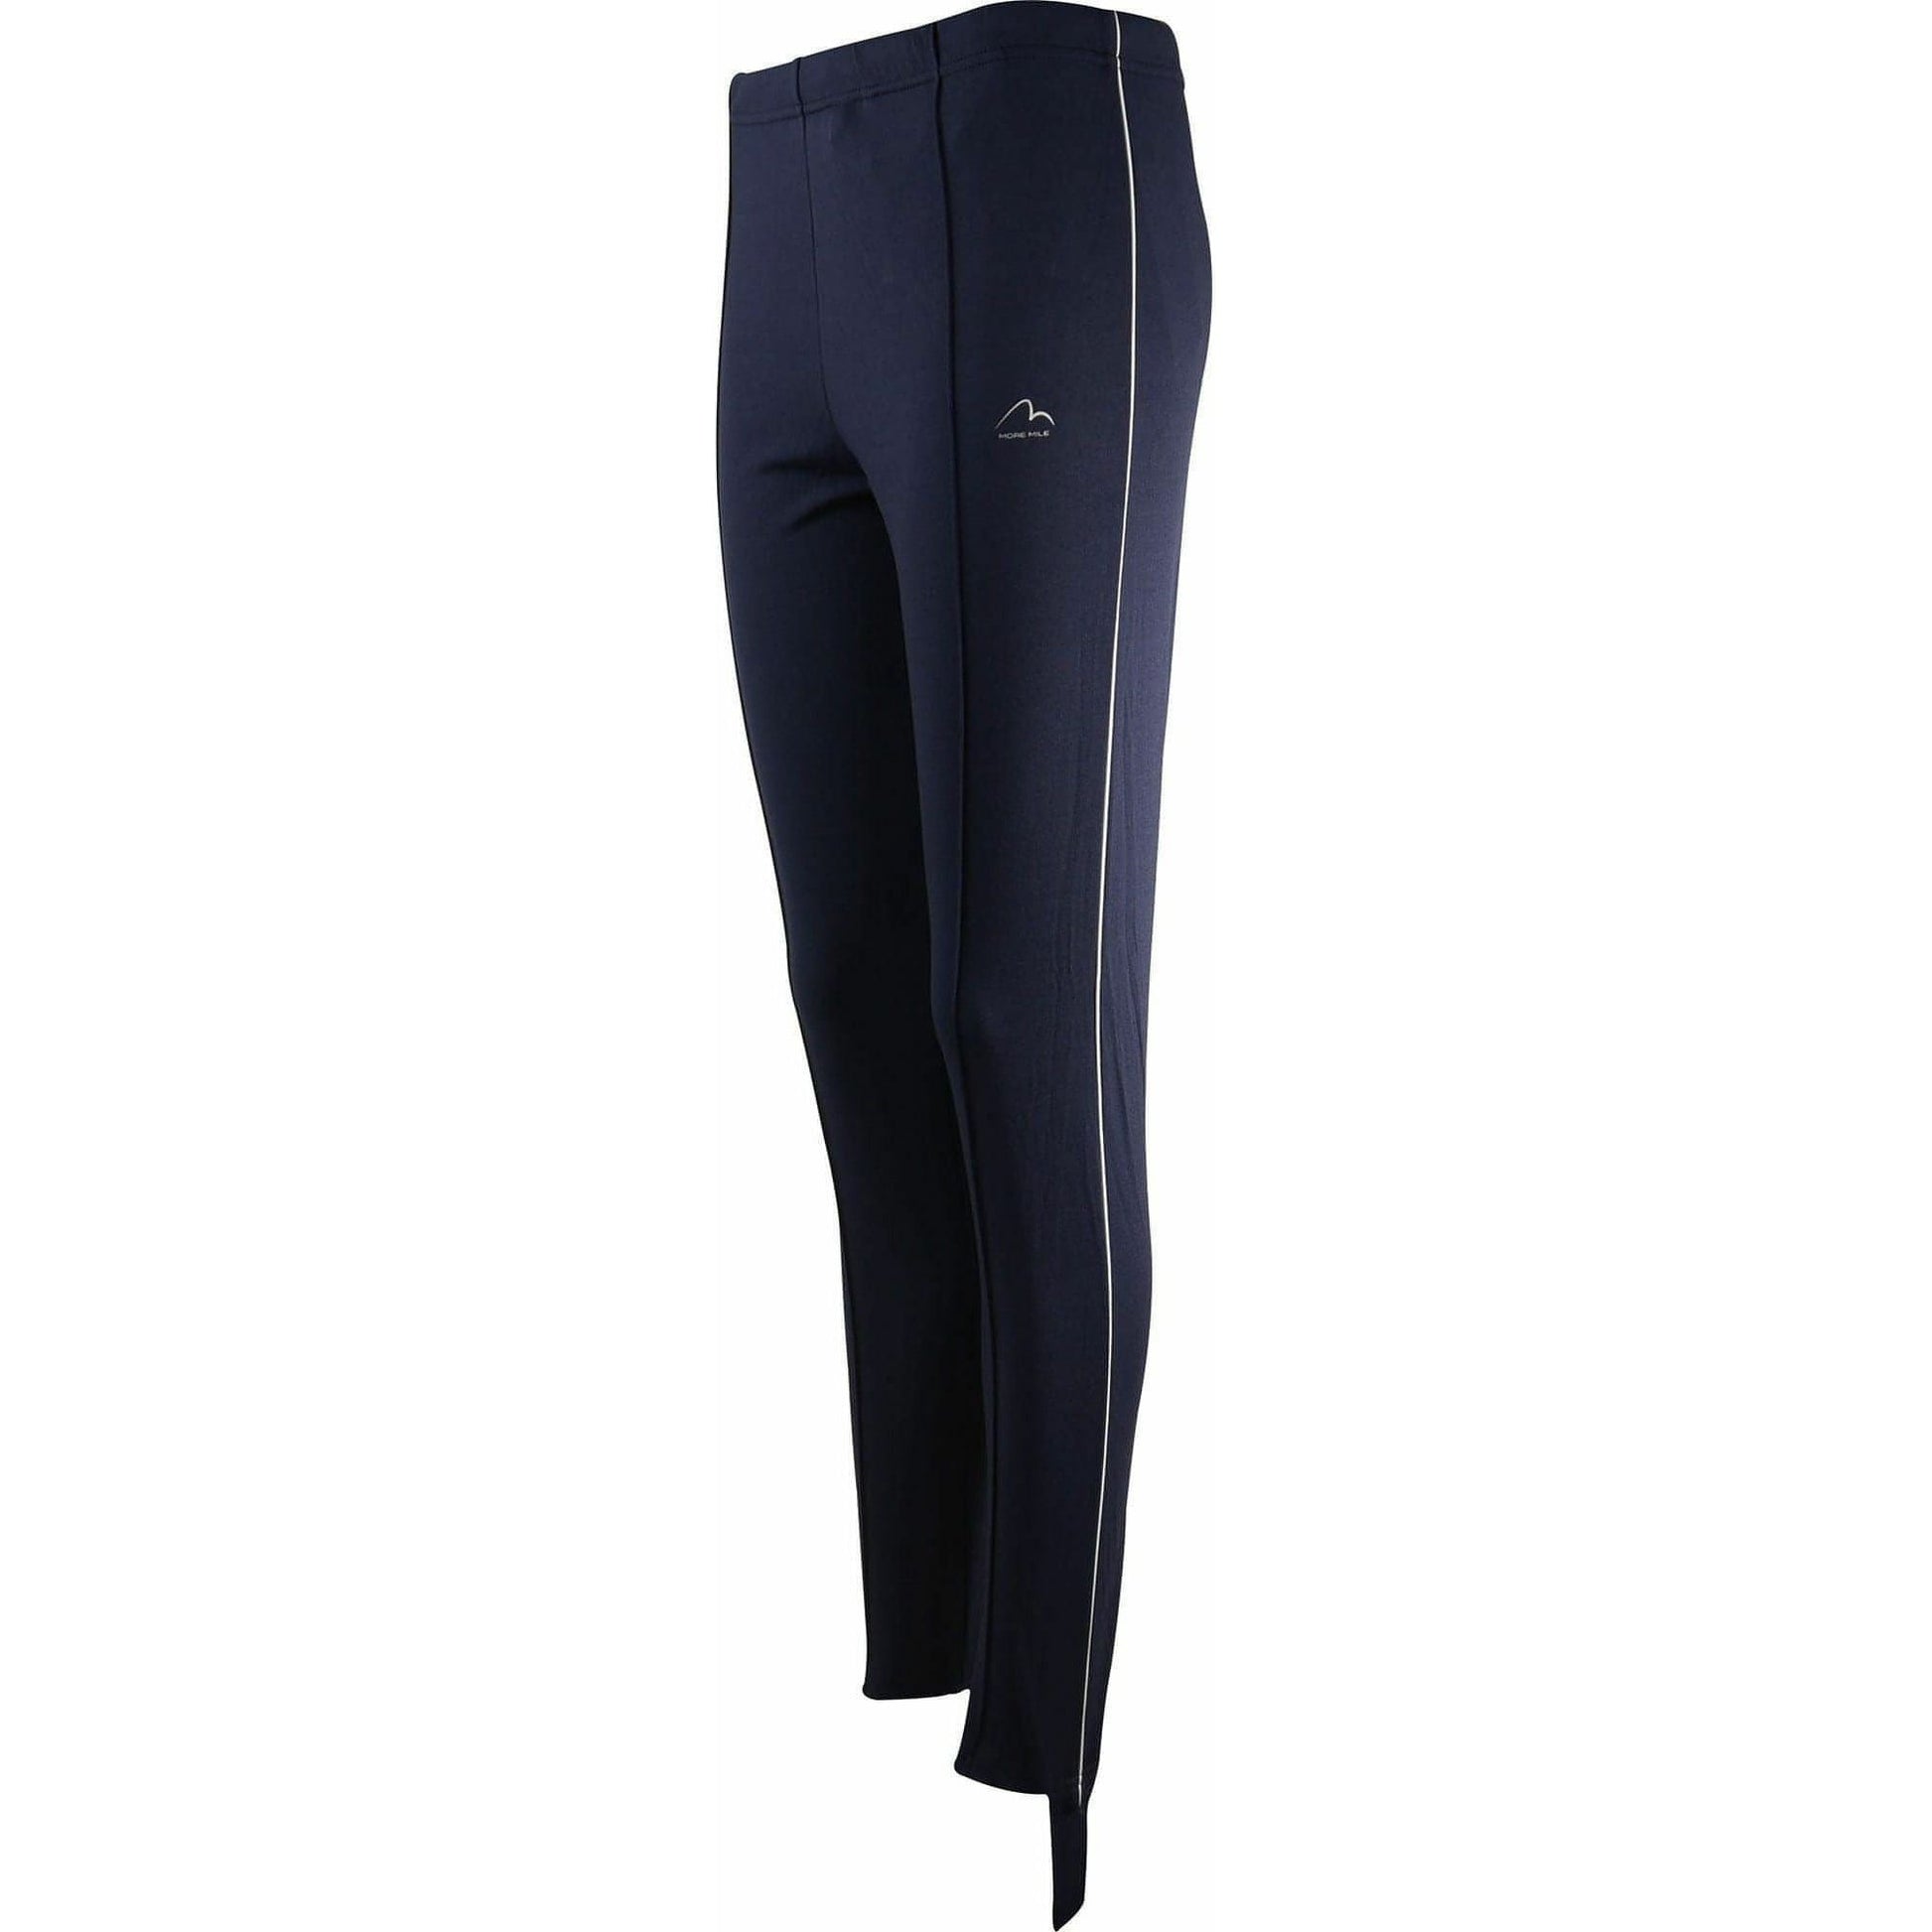 More Mile Essentials Womens Running Tracksters - Navy - Start Fitness